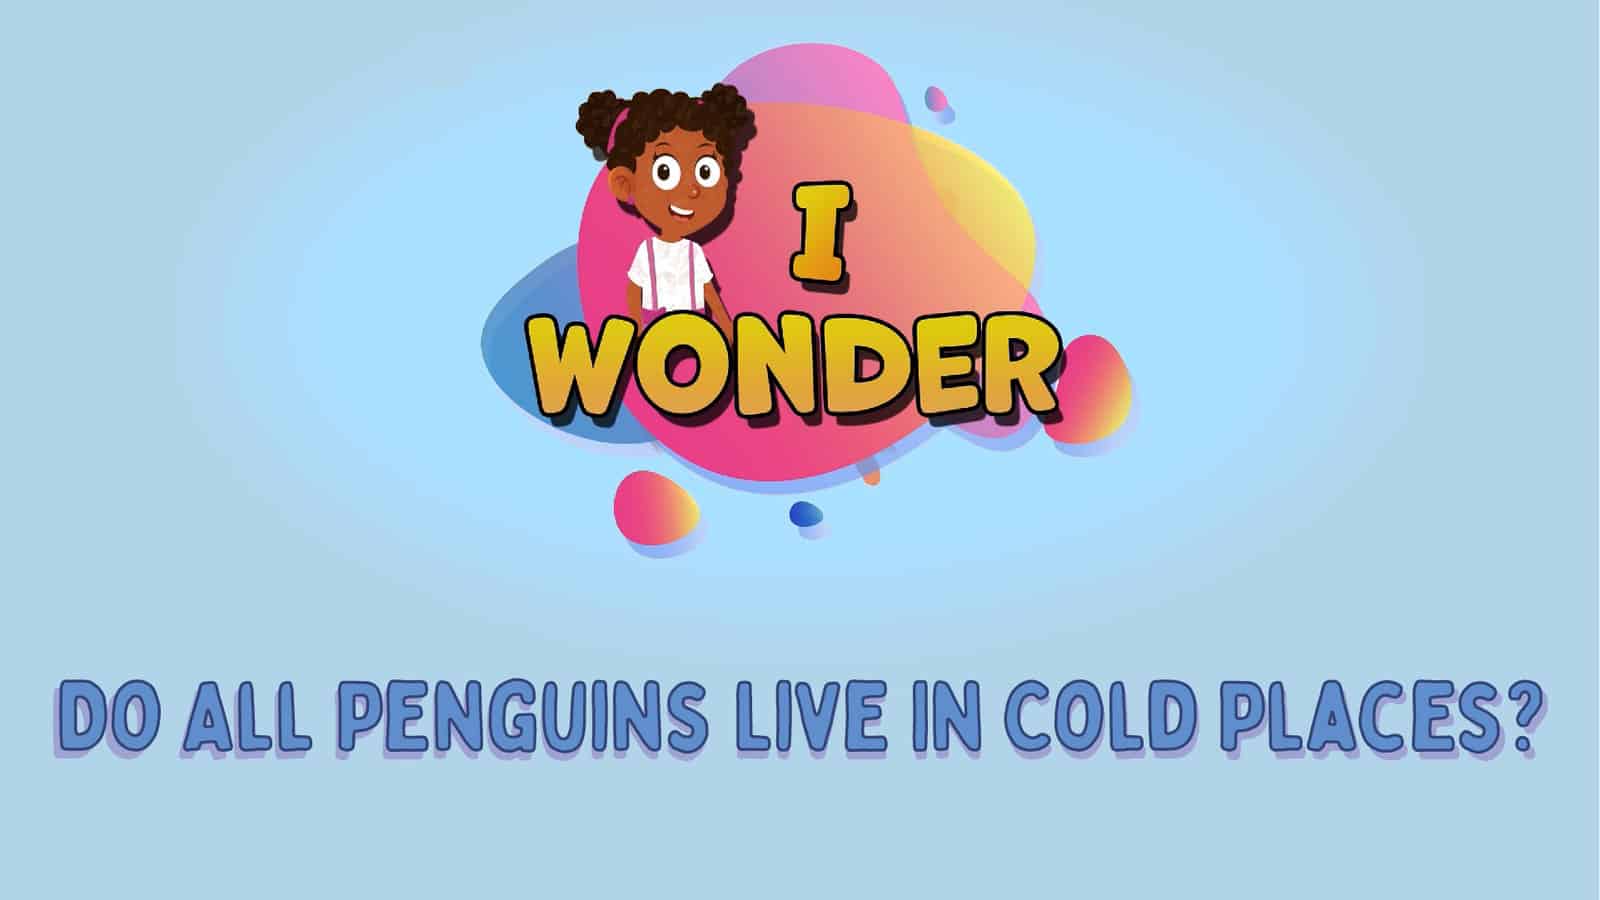 Do All Penguins Live In Cold Places?